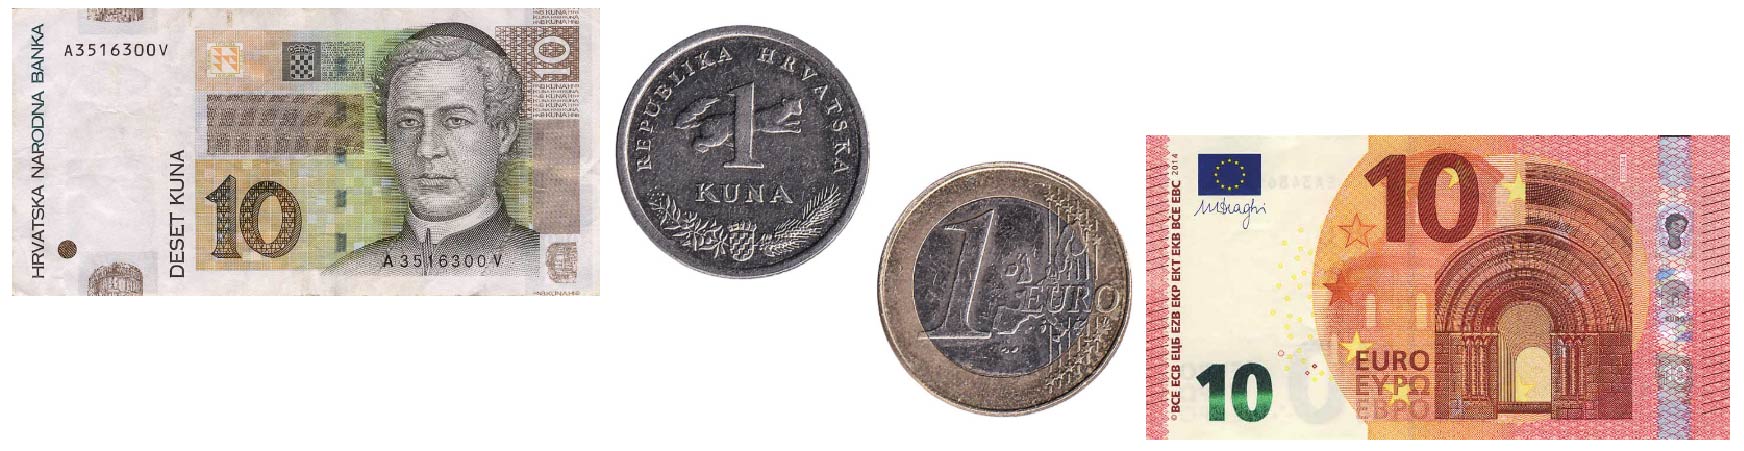 Croatian currency kuna to euro in What to do for companies?